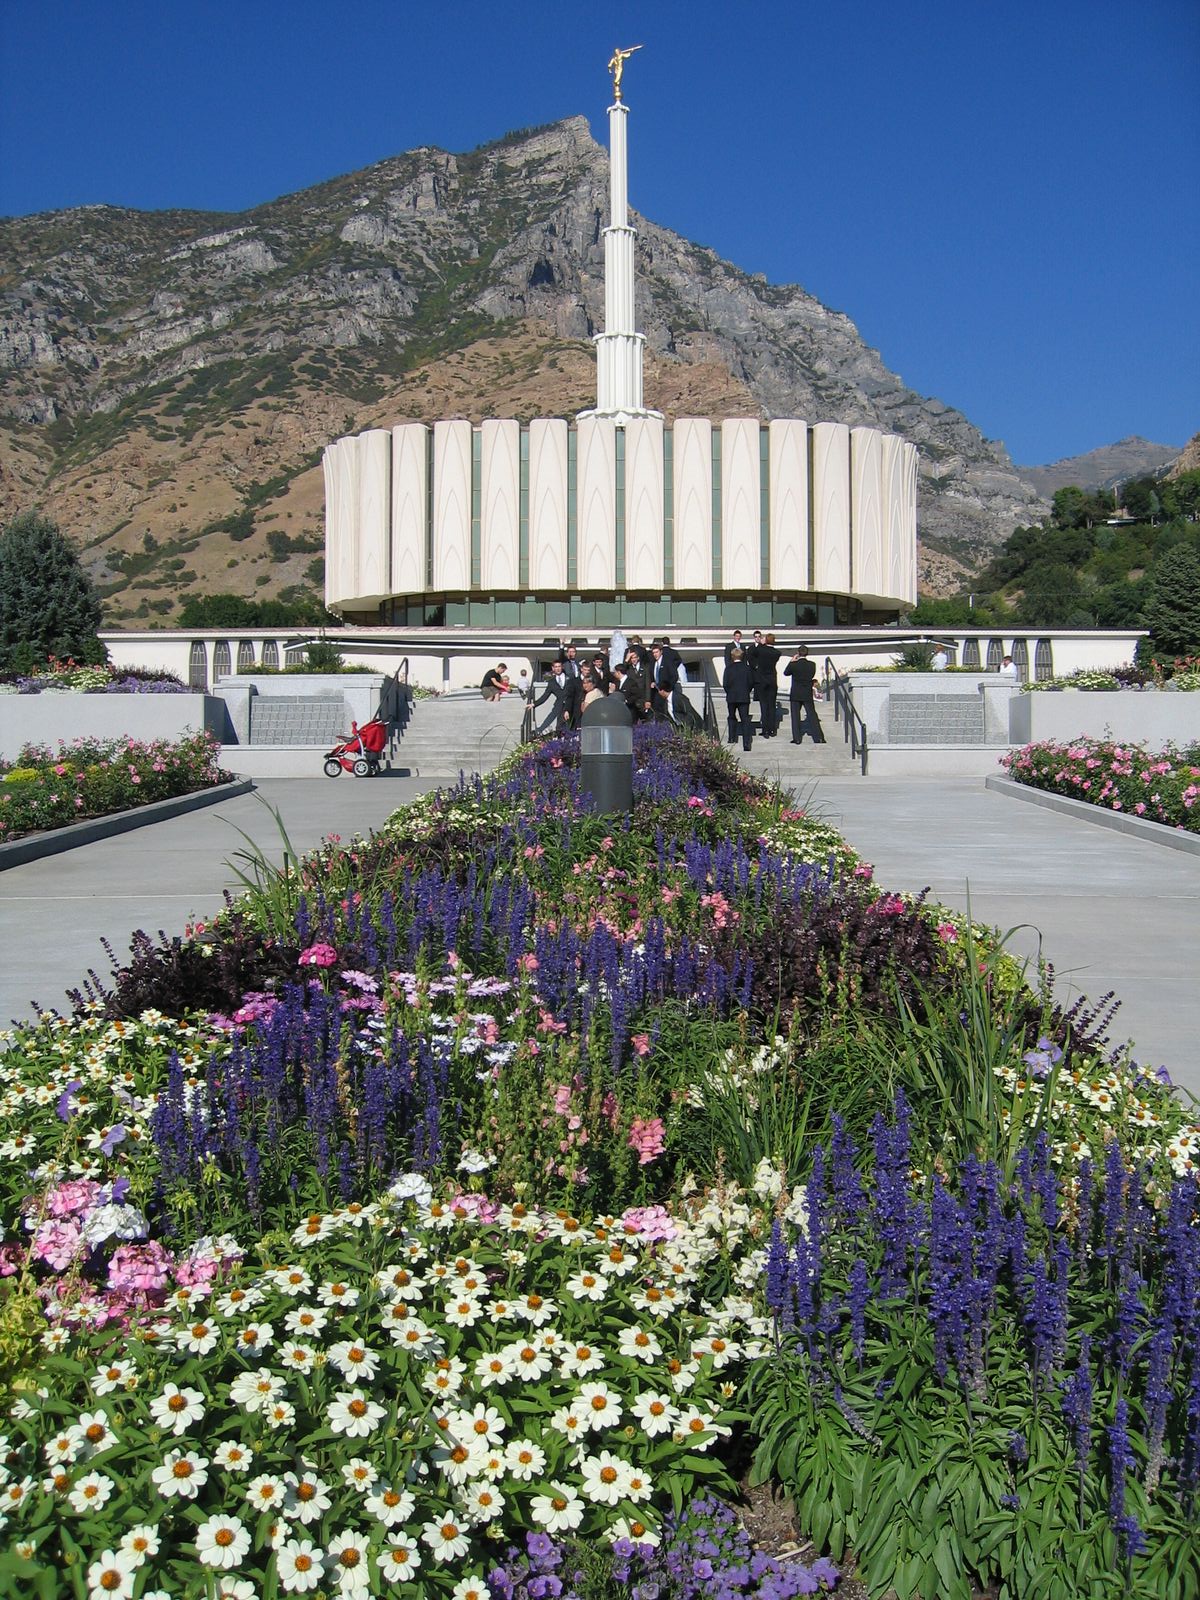 Flowers at the Provo Temple